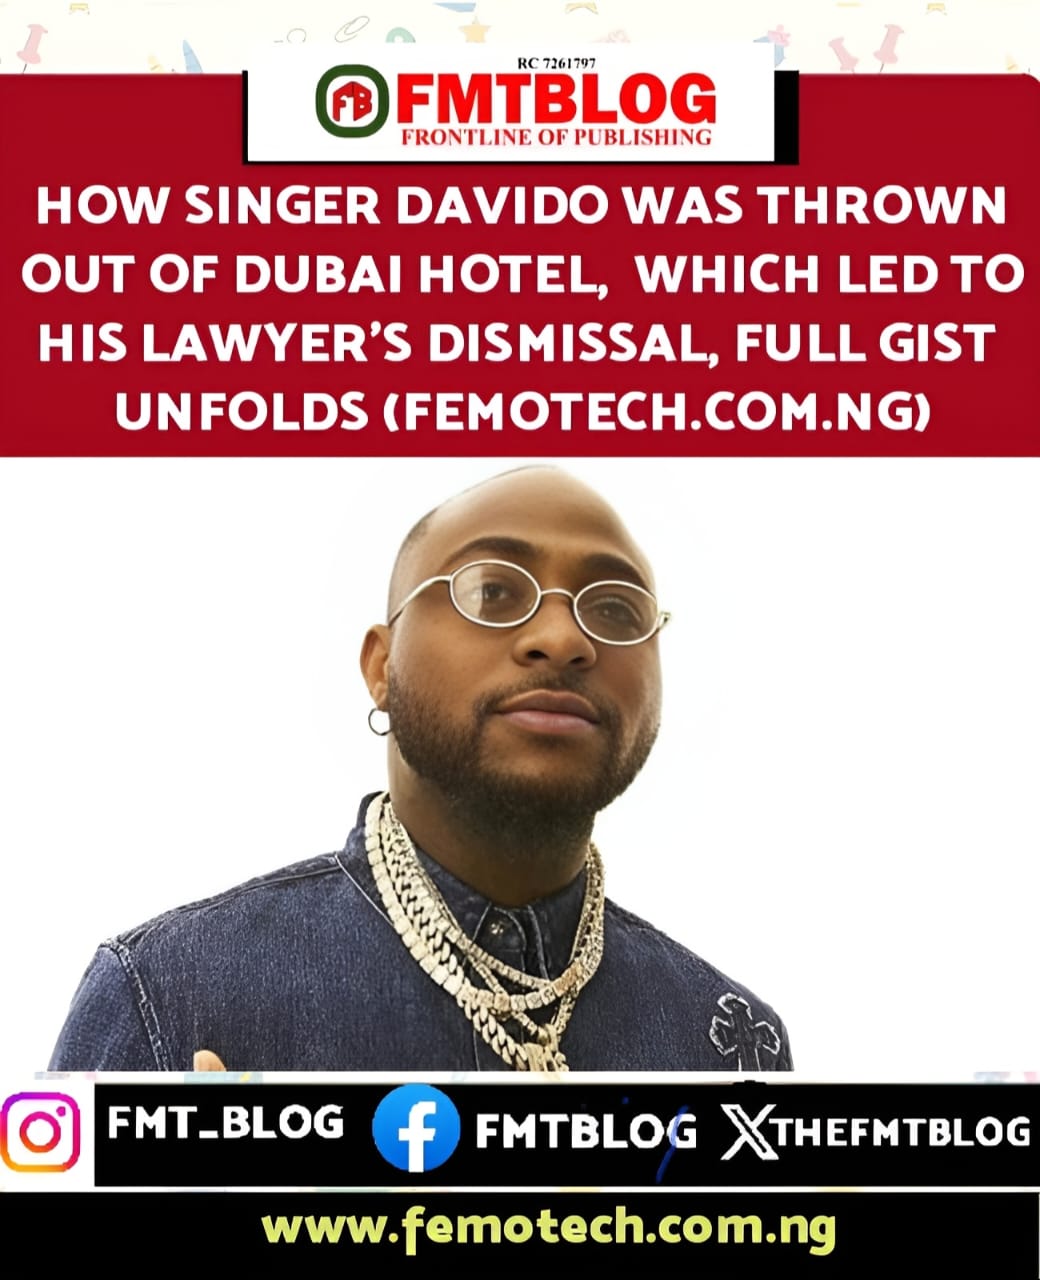 How Singer Davido Was Thrown Out of Dubai Hotel, Which Led To His Lawyer’s Dismissal. Full Gist Unfolds